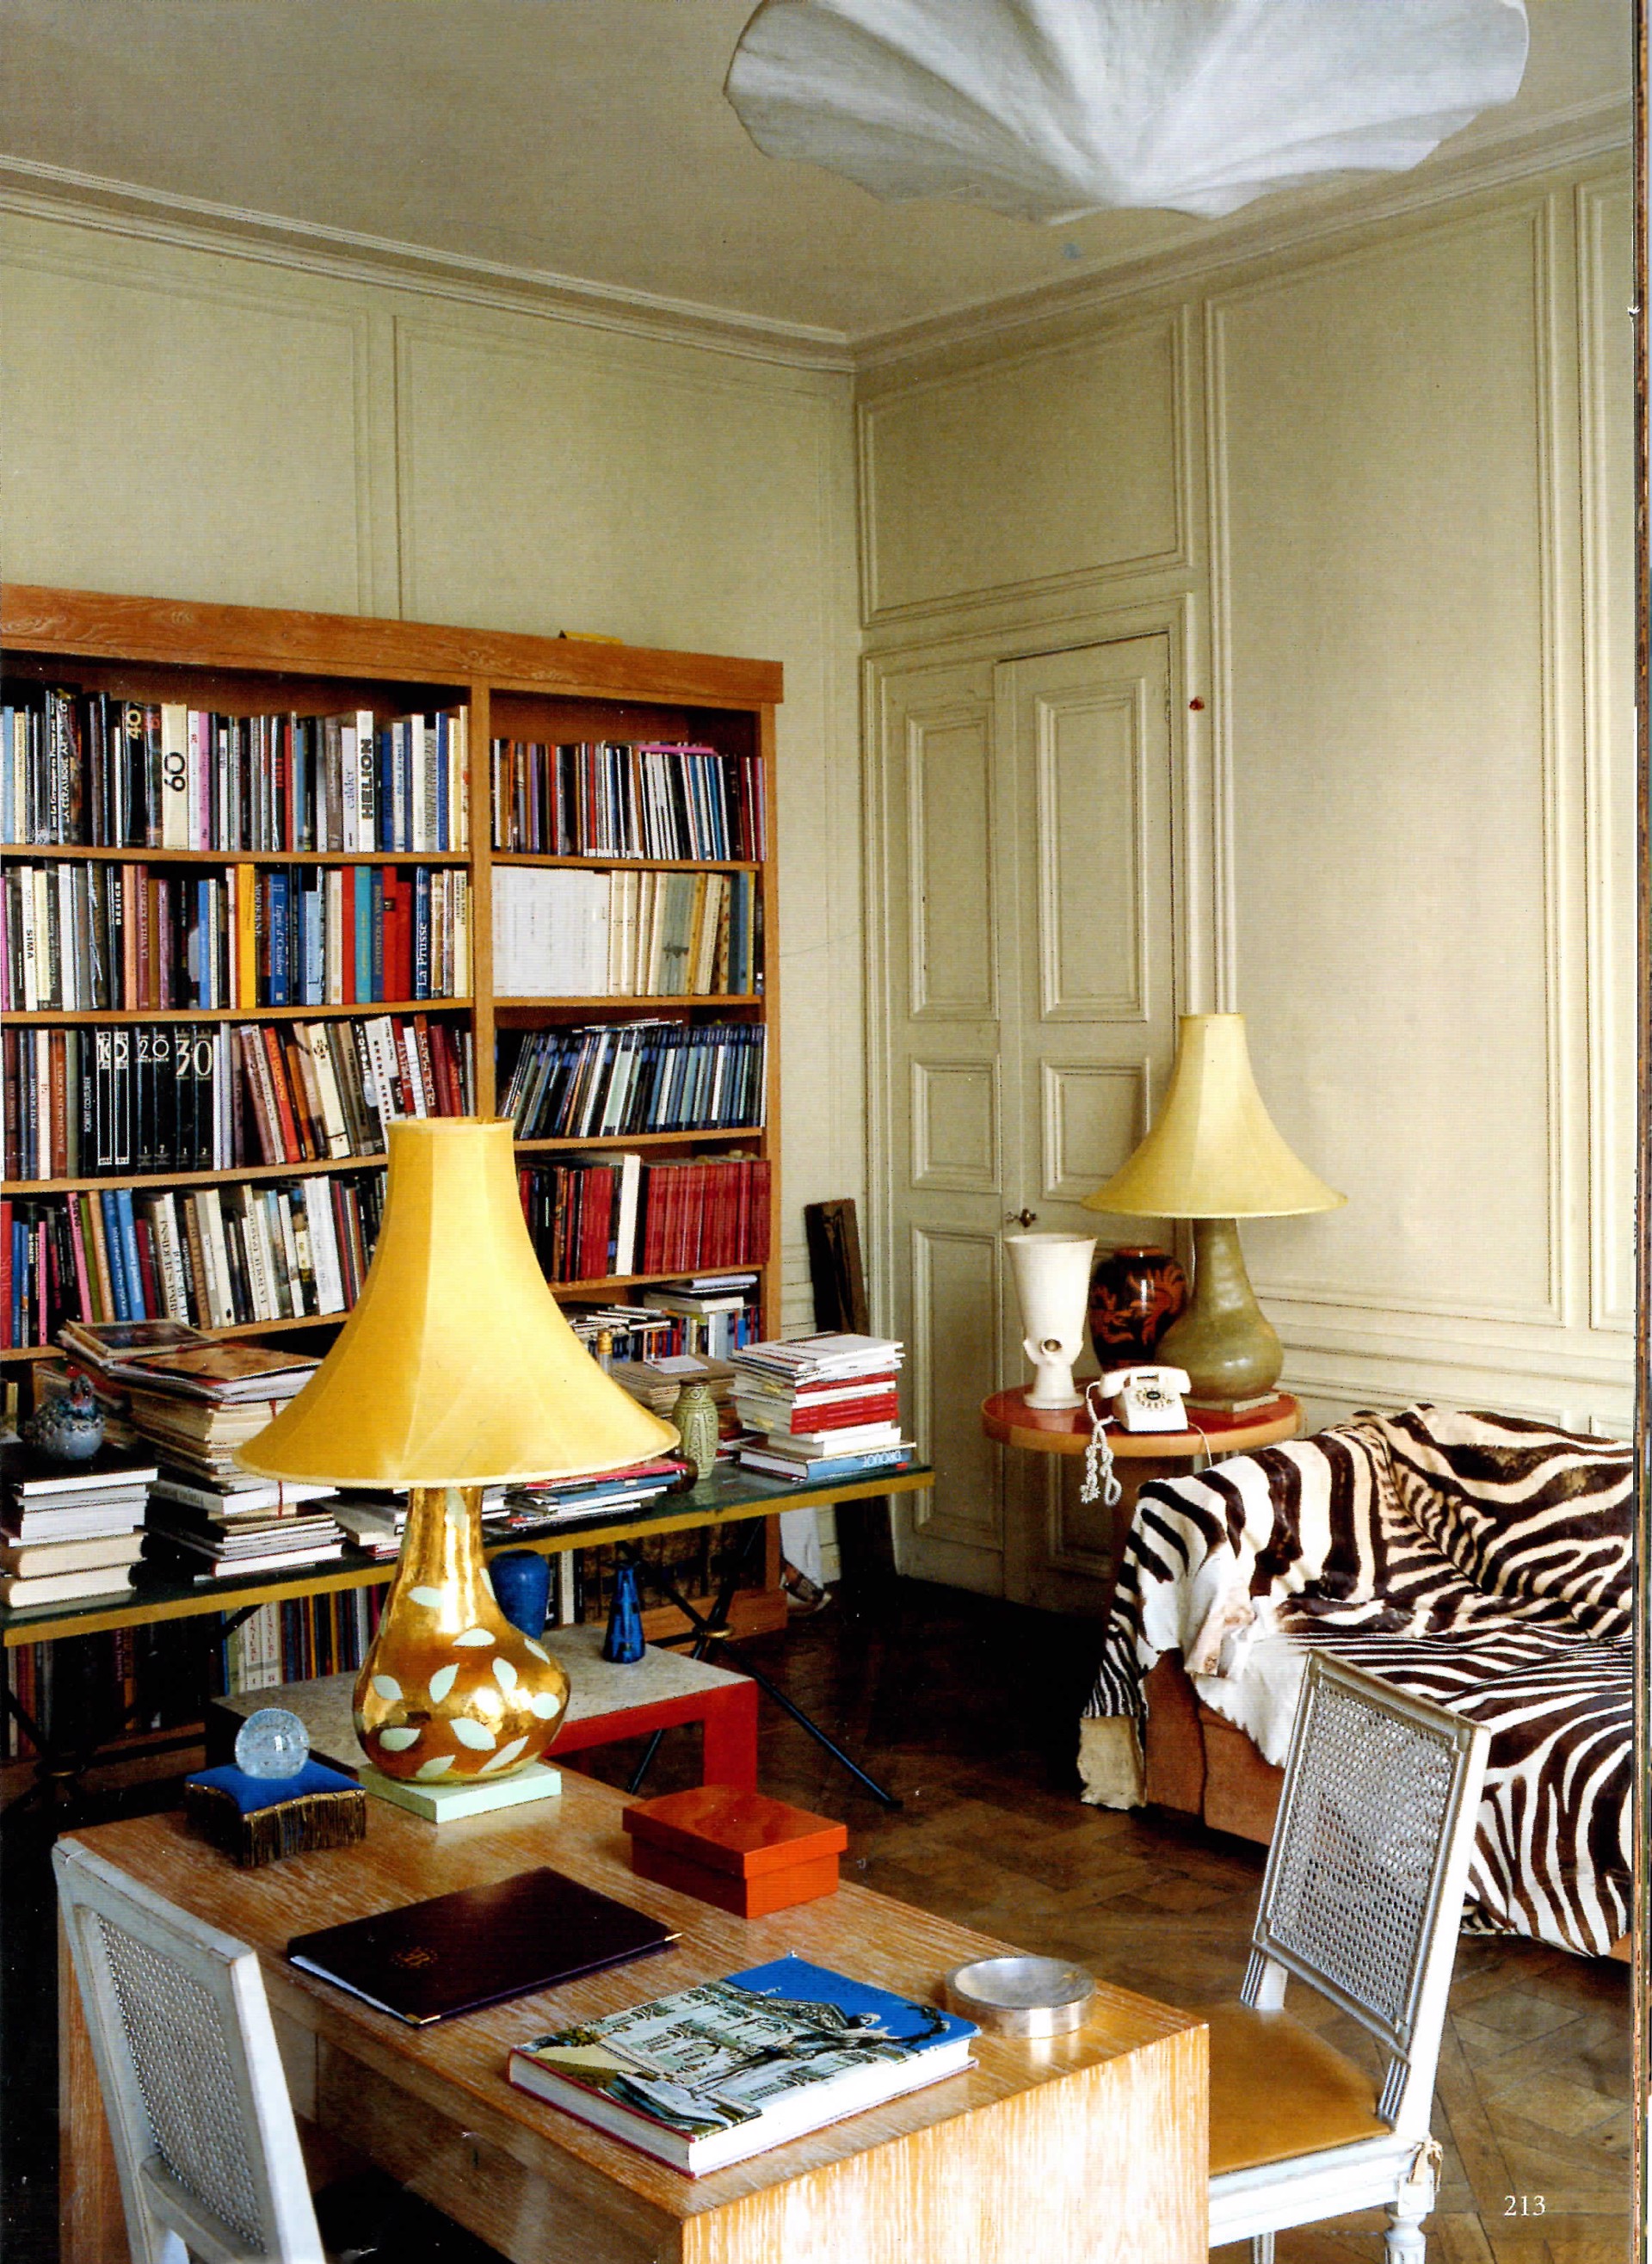 The World of Interiors, May 2011 - Jacques Jarrige